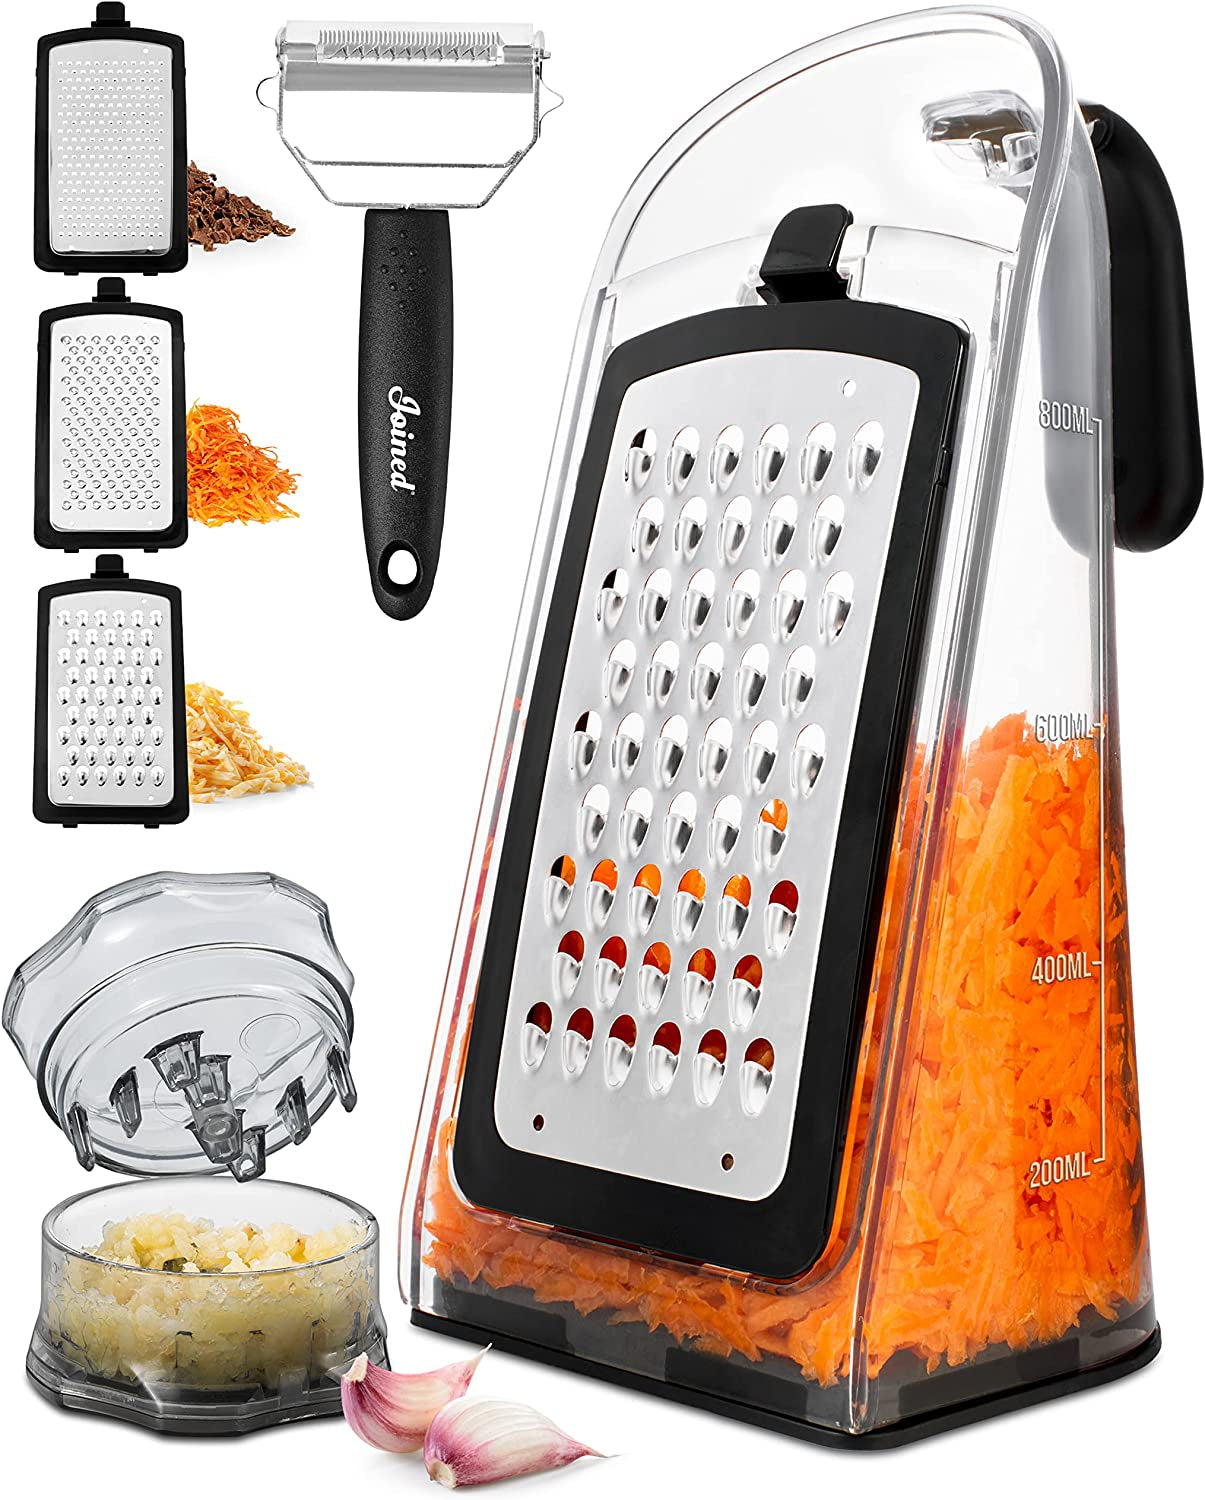 Stainless Steel Cheese Grater, Shredder With Handle, Garlic Mincer Tool and Vegetable Peeler